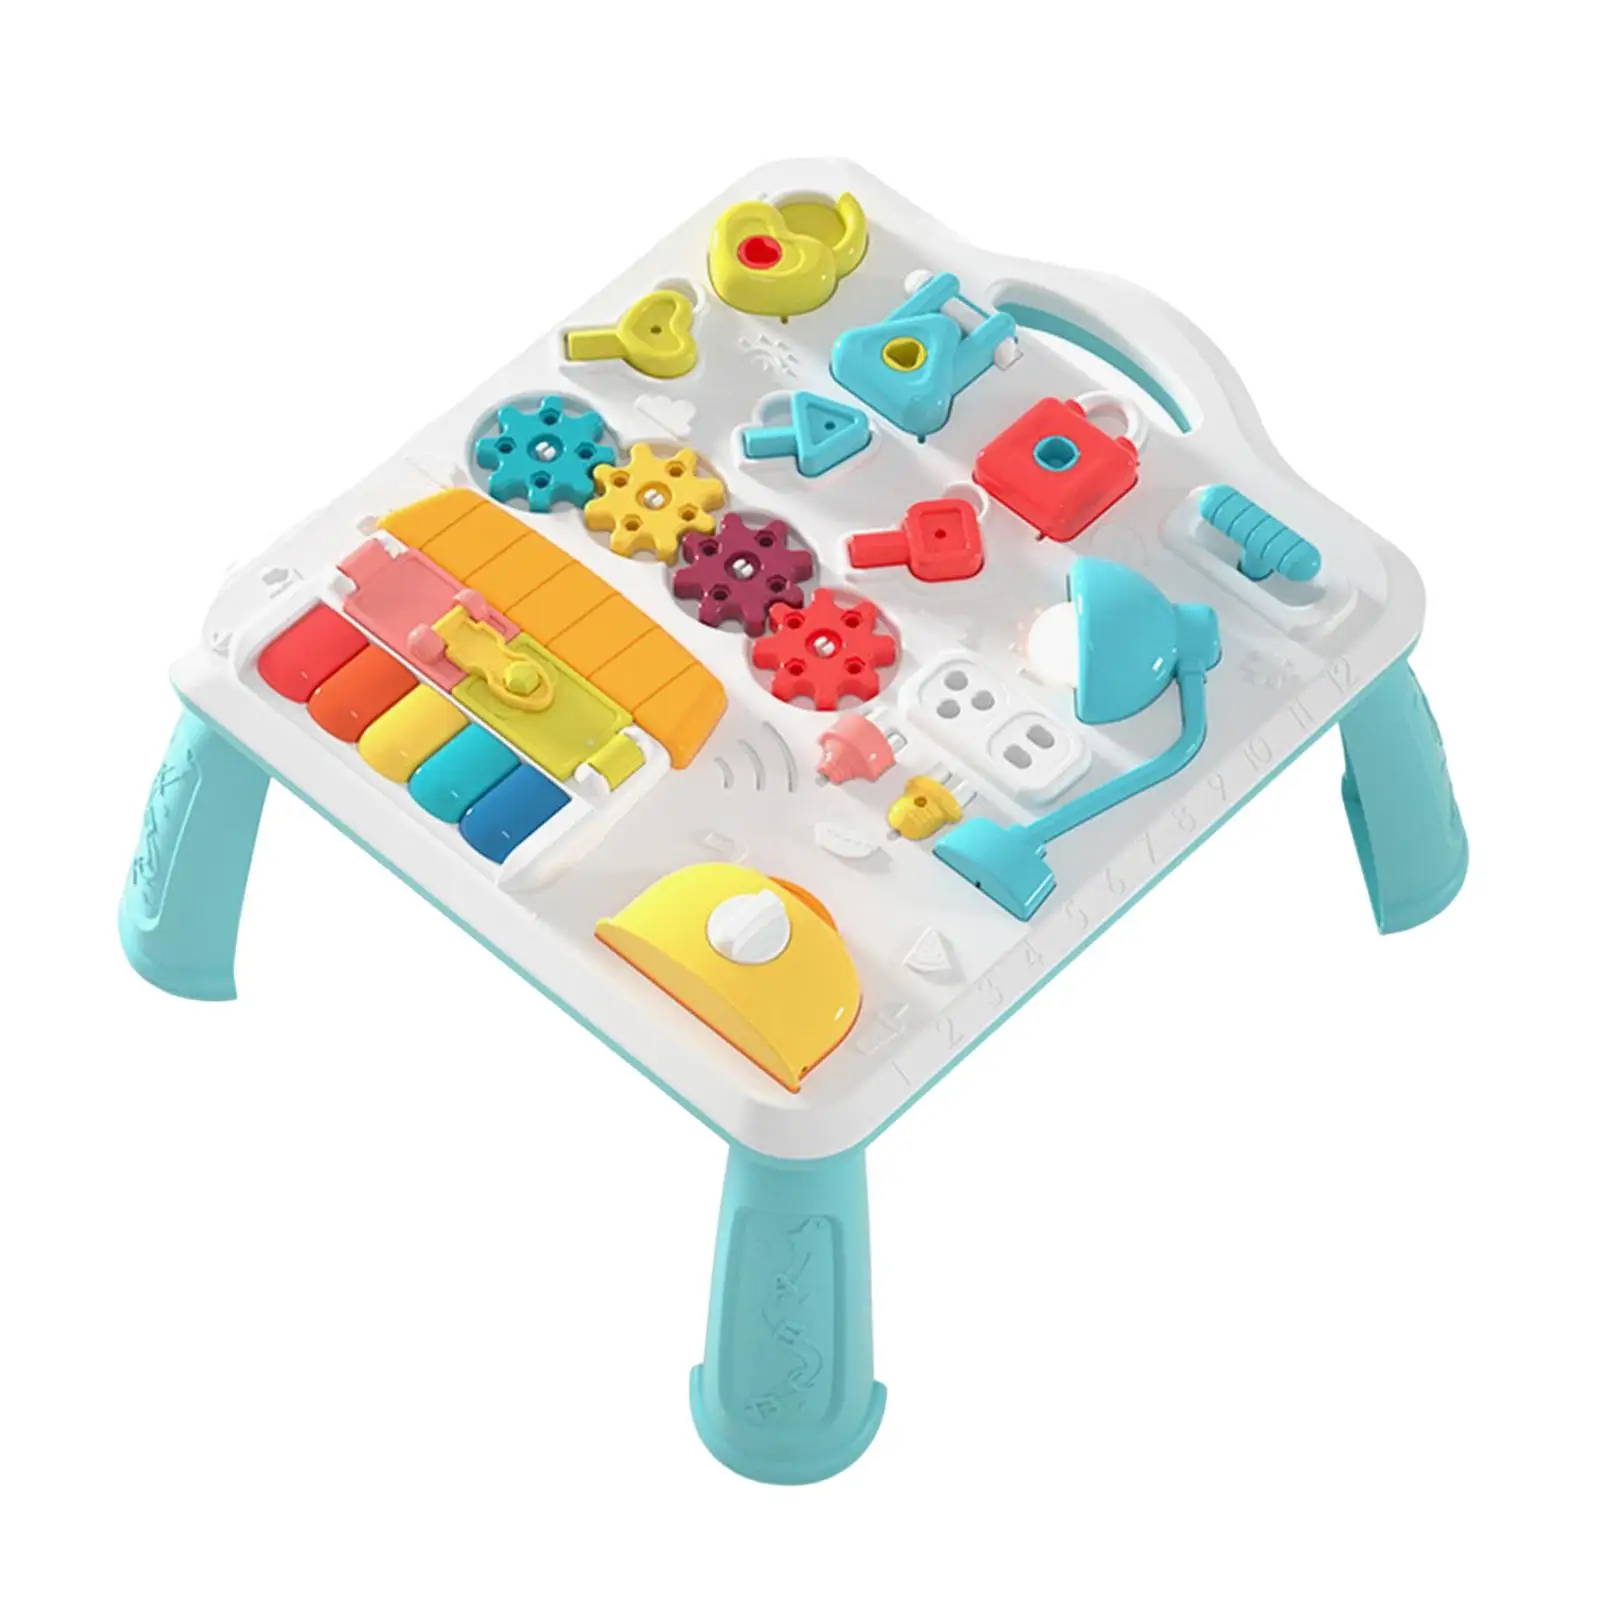 Activity Table Early Education Toys with Leg Support Colorful Busy Table for Boys